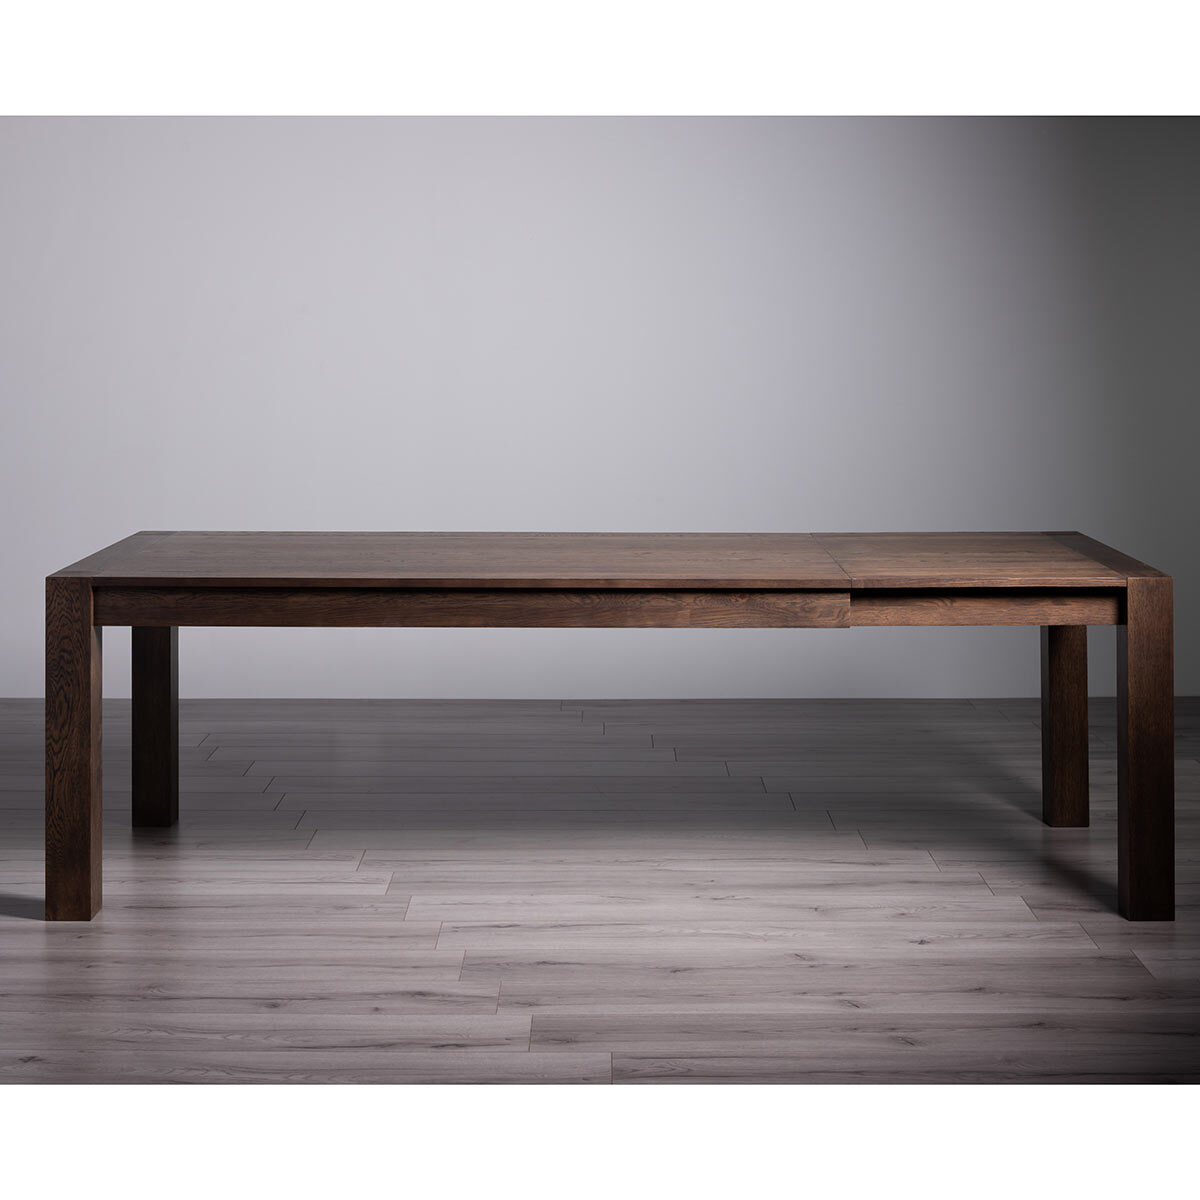 Lifestyle image of Milan Dinging table while extended